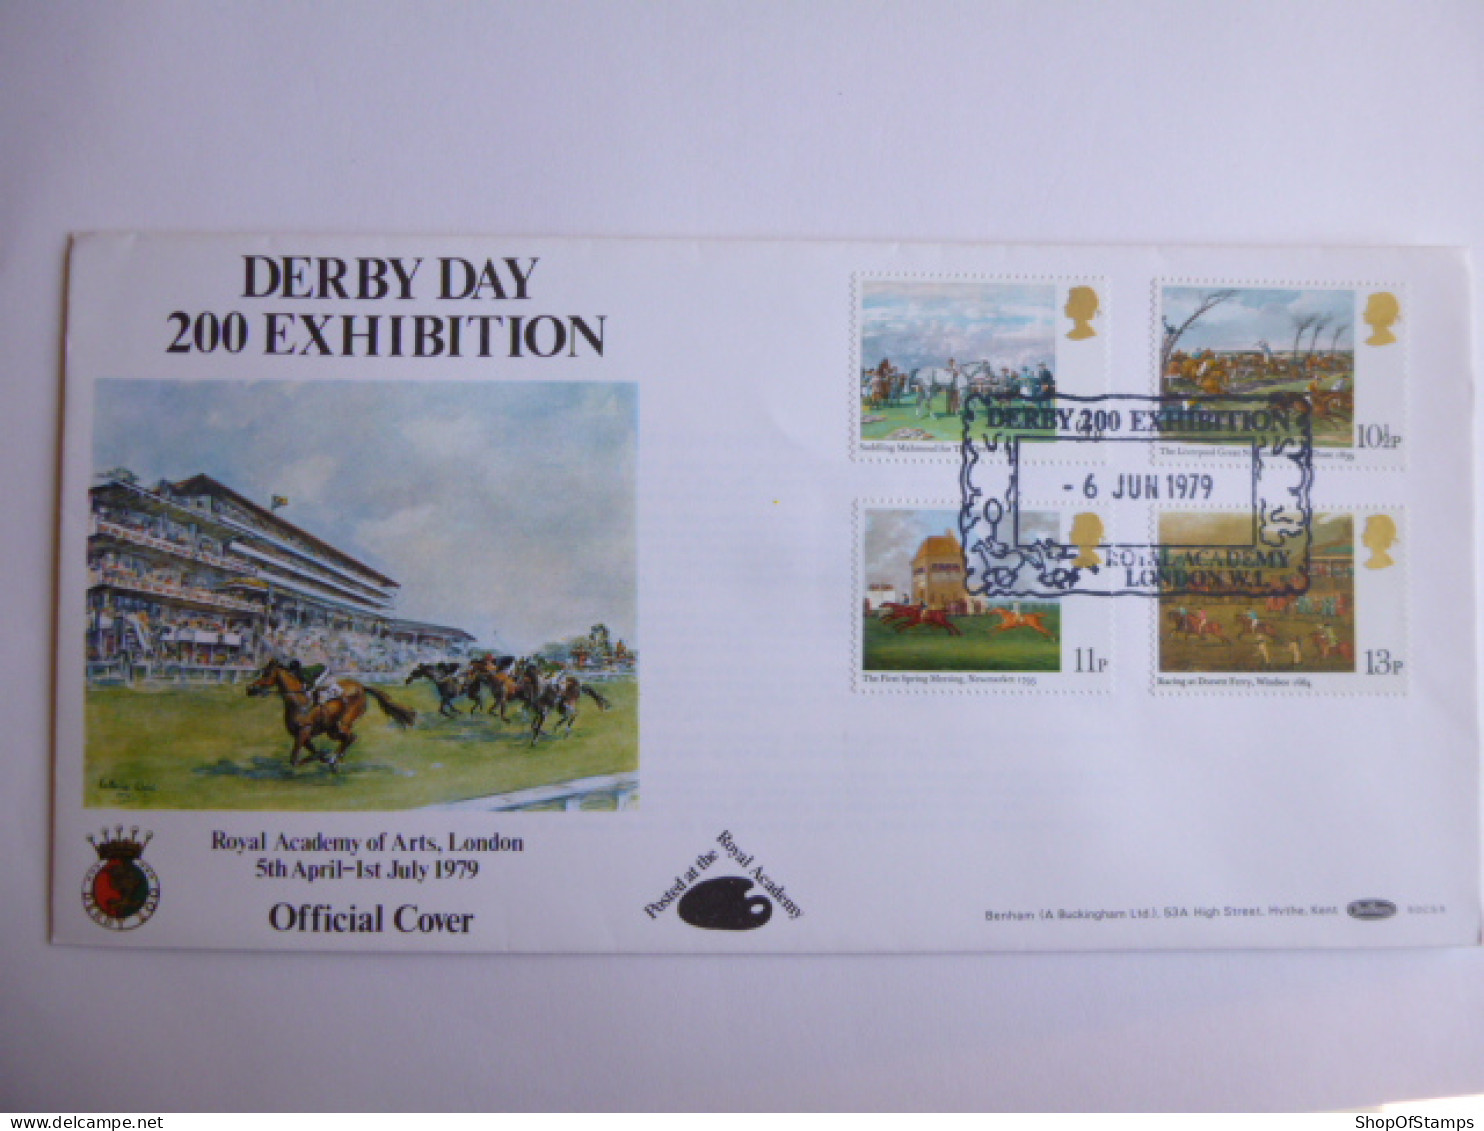 GREAT BRITAIN SG 1087-90 HORSE RACING PAINTINGS   FDC DERBY DAY 200 EXHIBITION - Unclassified